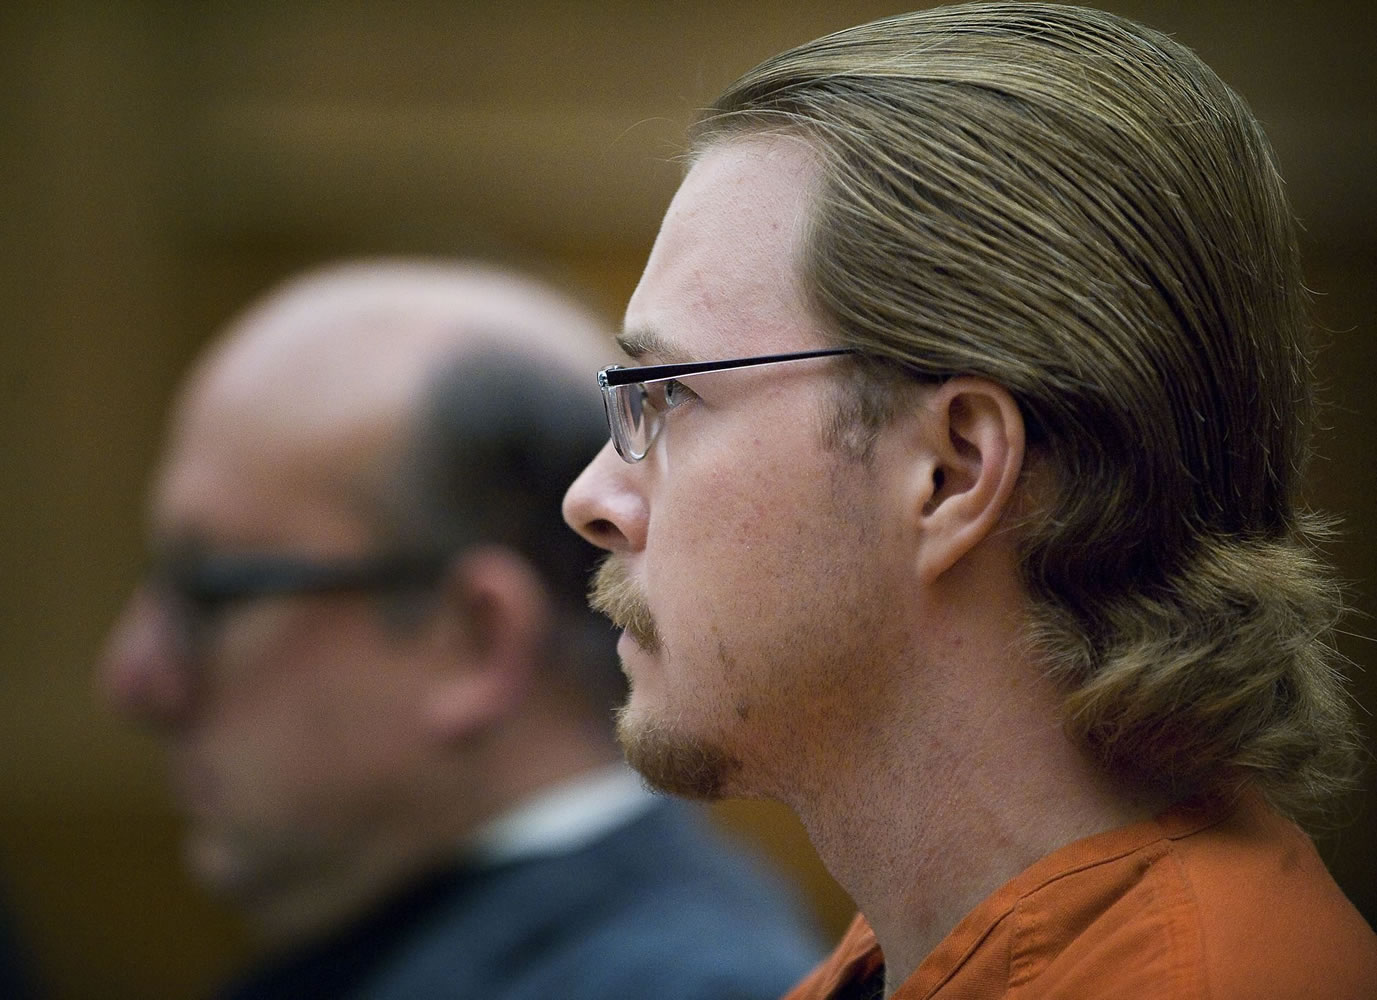 Washington Man Could Be Released in 2 1/2 Years After 1994 Murder Resentencing